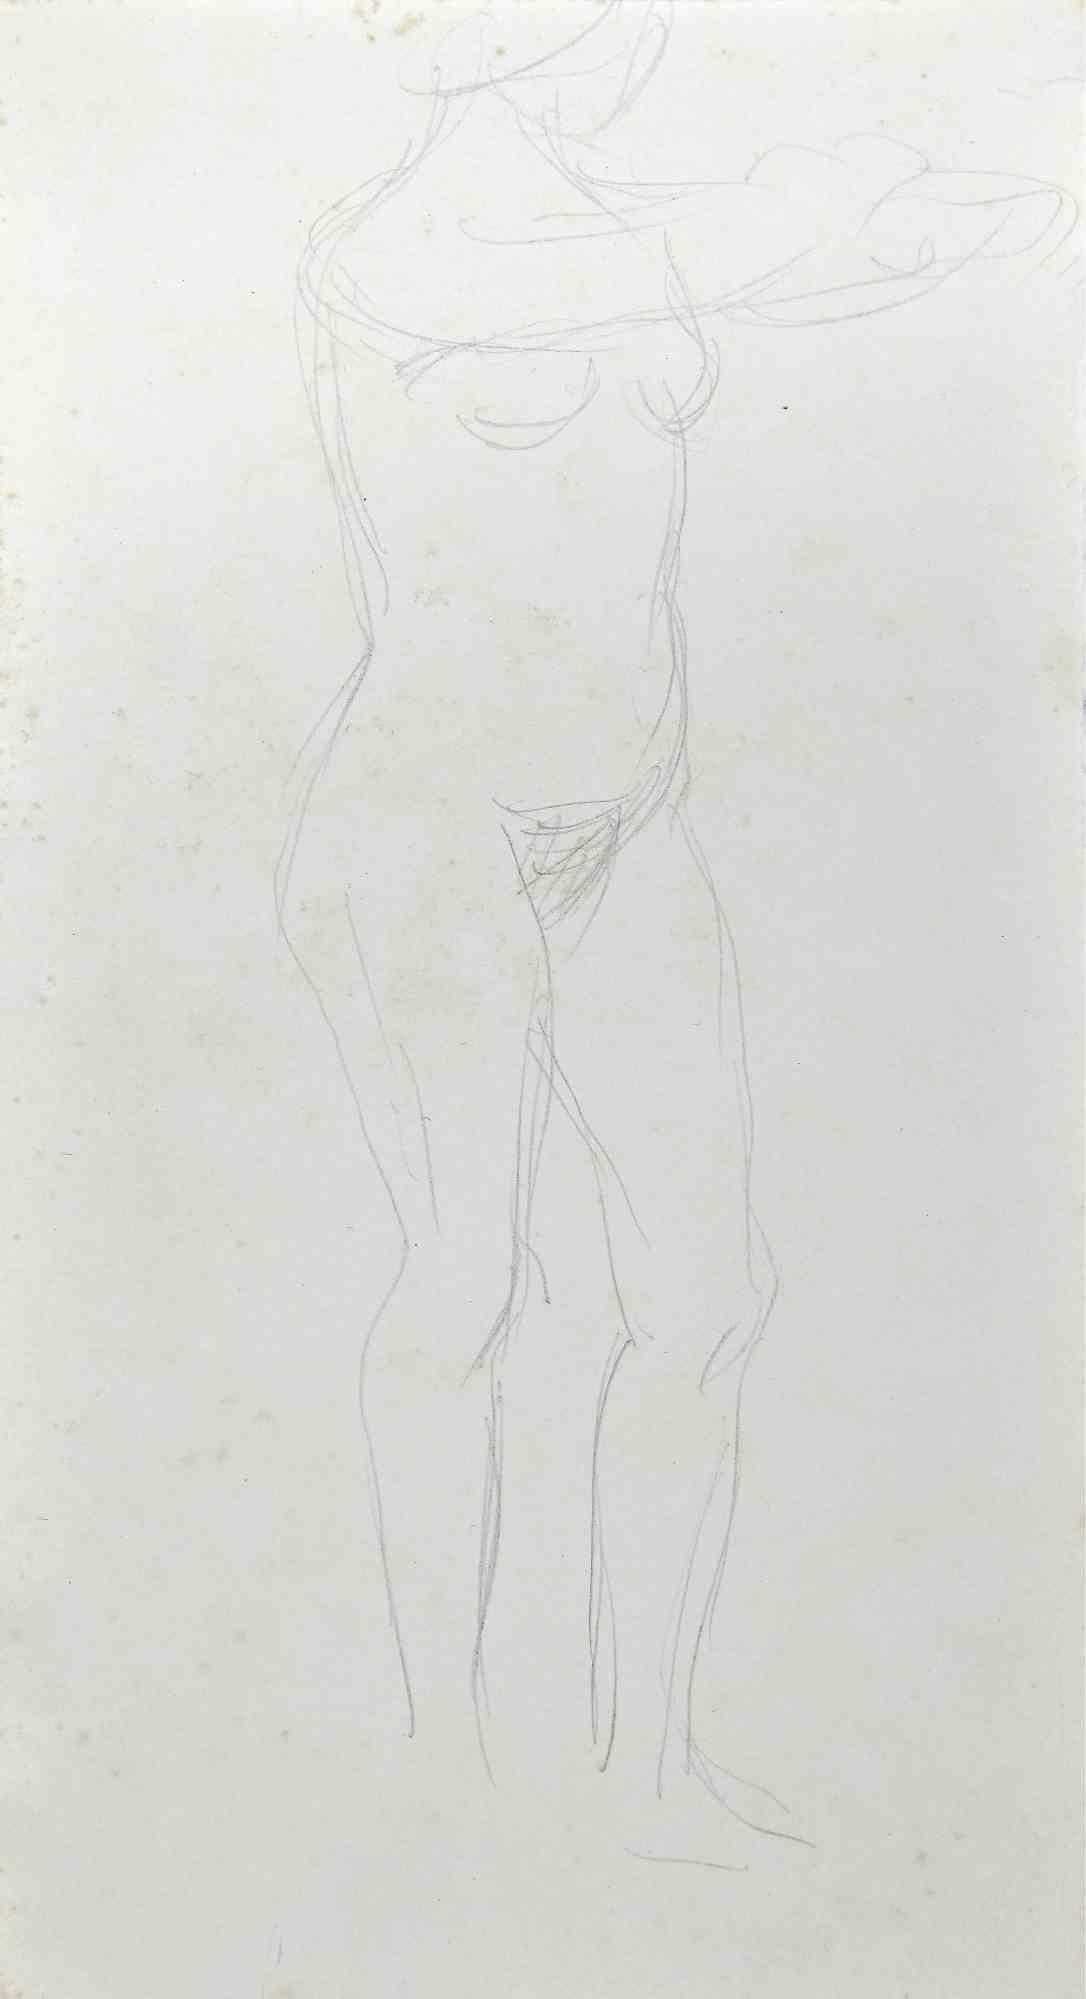 Unknown Figurative Art - The Posing Nude - Original Drawing - Early 20th Century